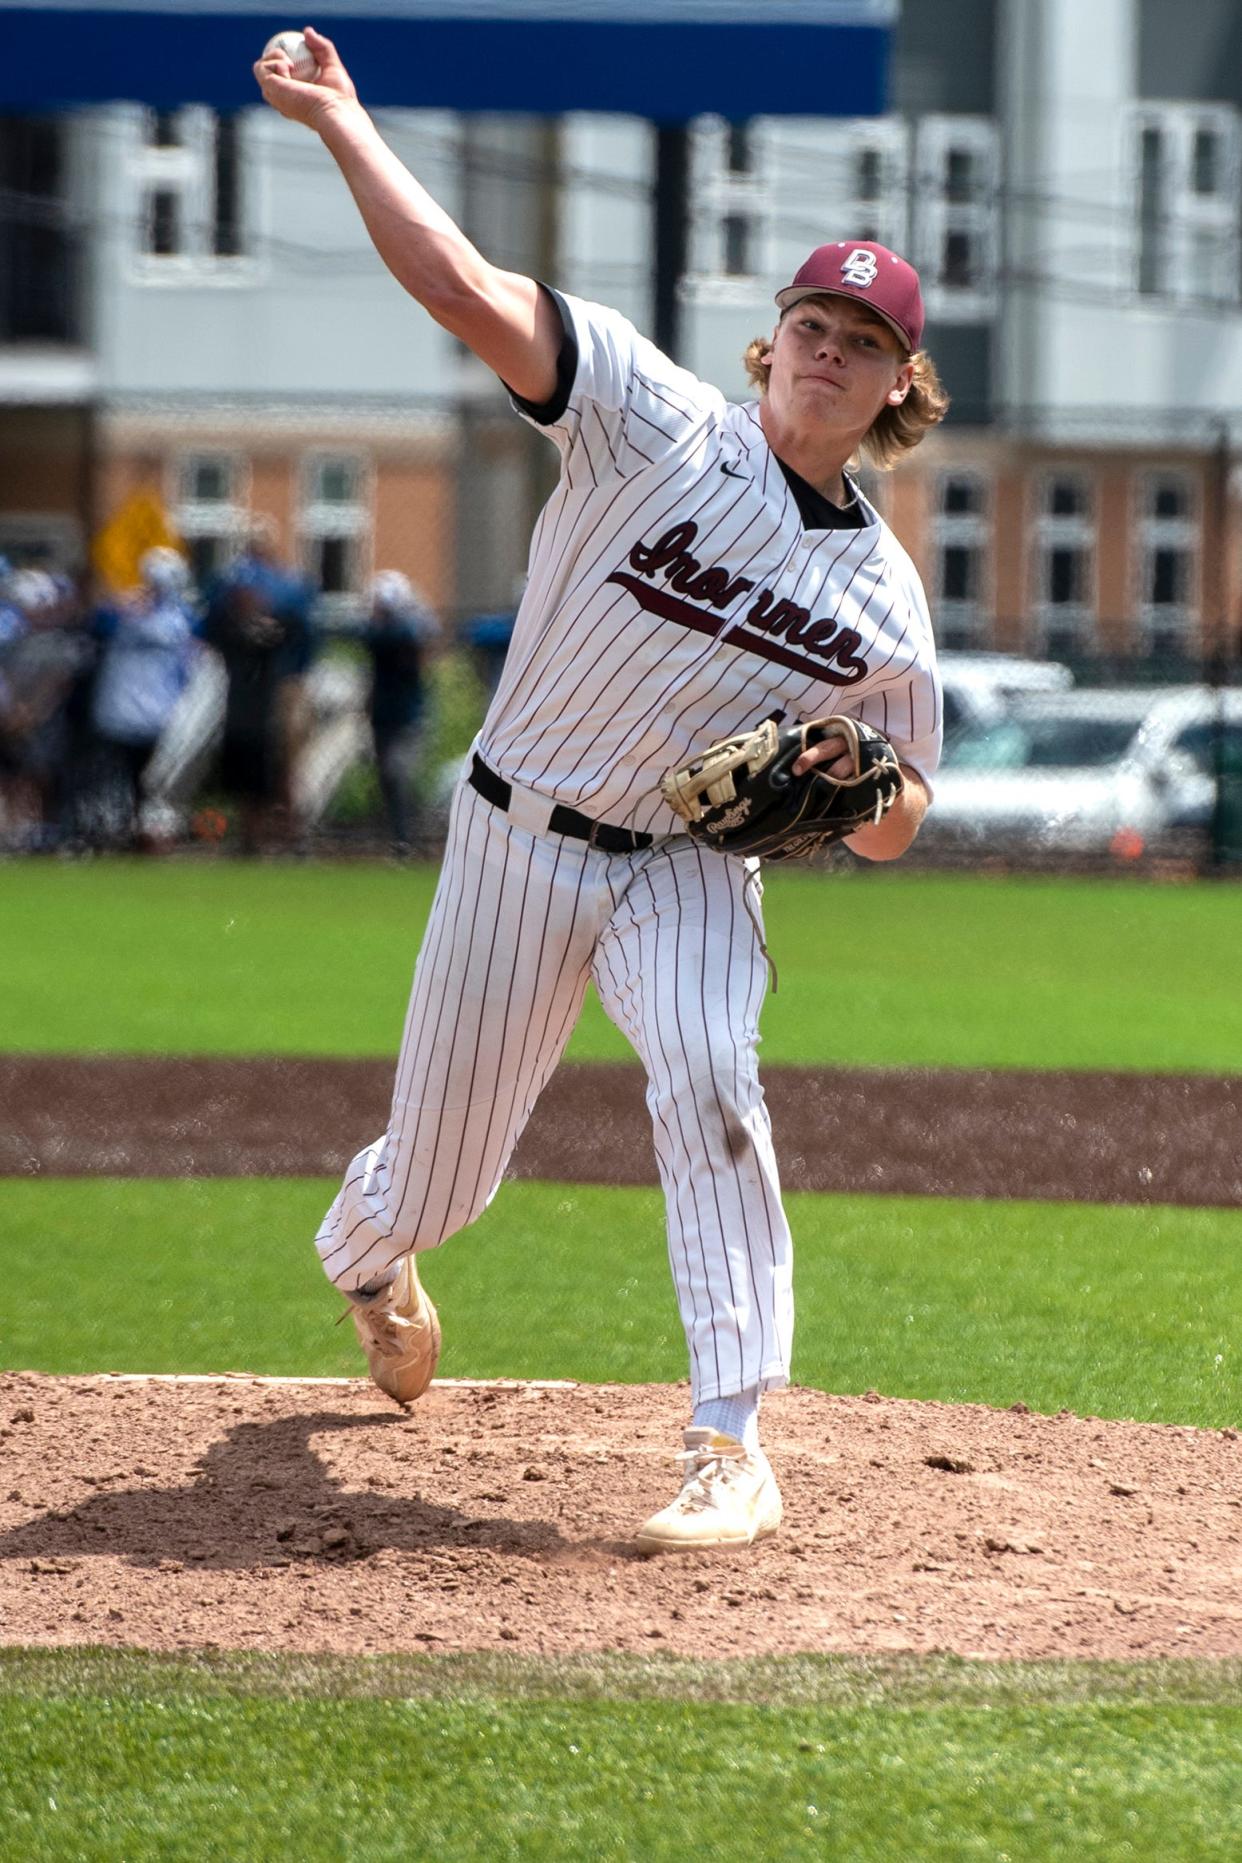 Don Bosco and St. Joseph play in the Bergen County baseball tournament championship in Wood-Ridge on May 31, 2021. Caden Dana #11 starting pitcher for Don Bosco.